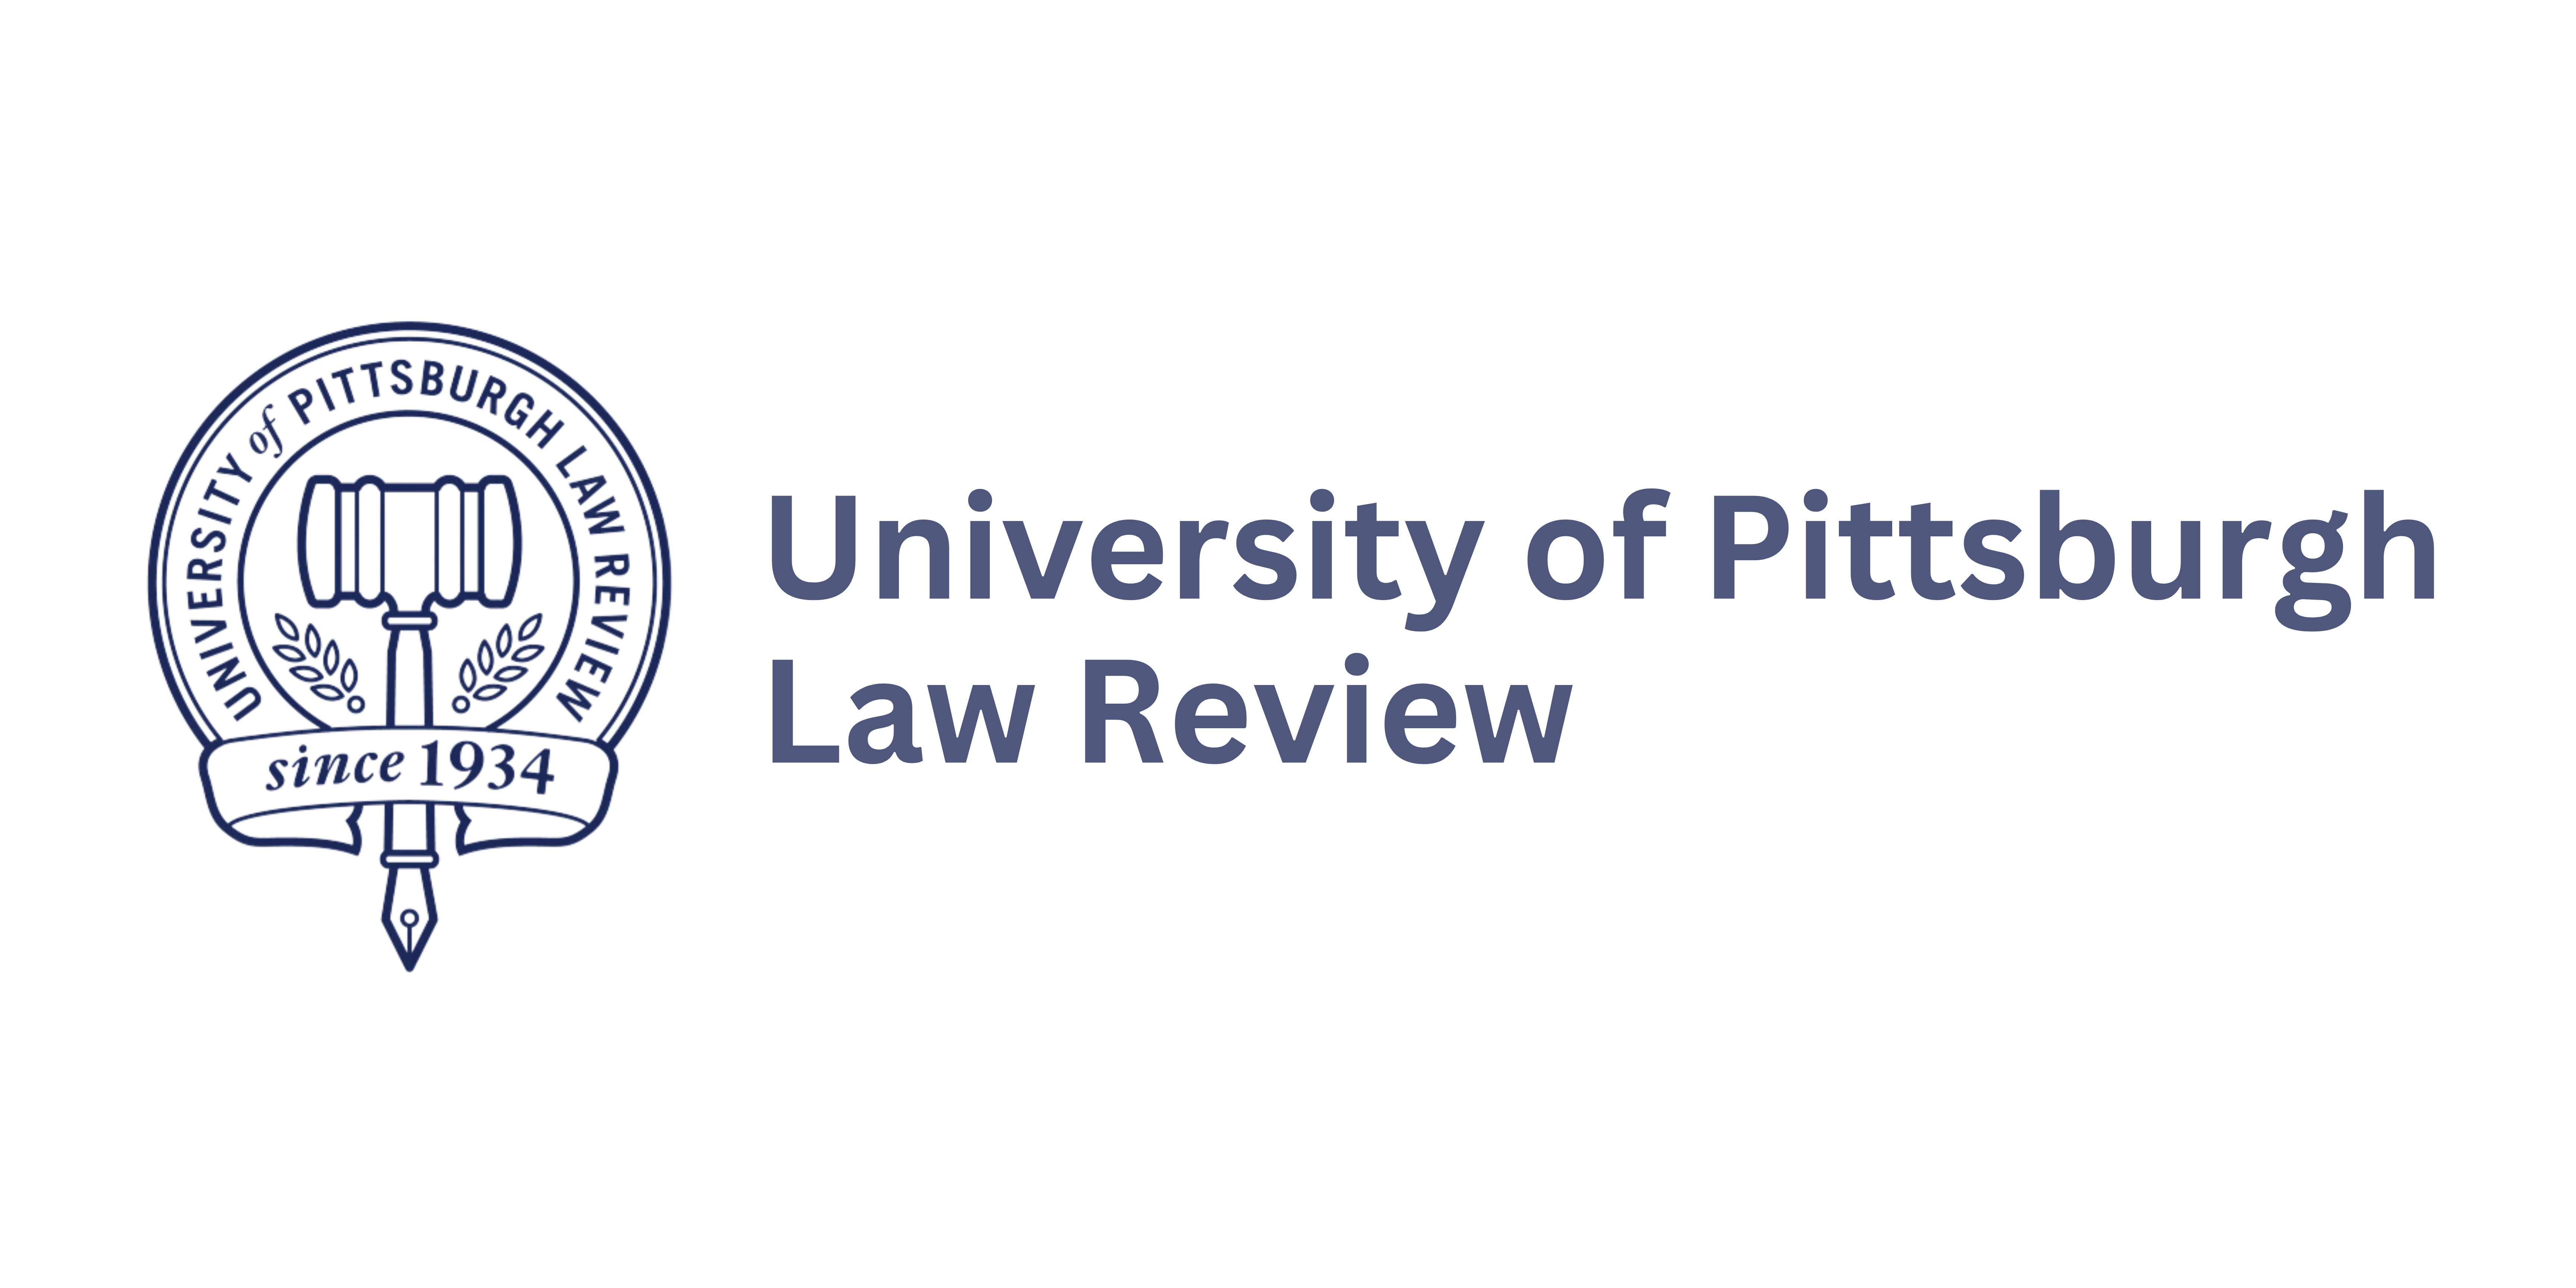 University of Pittsburgh Law Review Journal